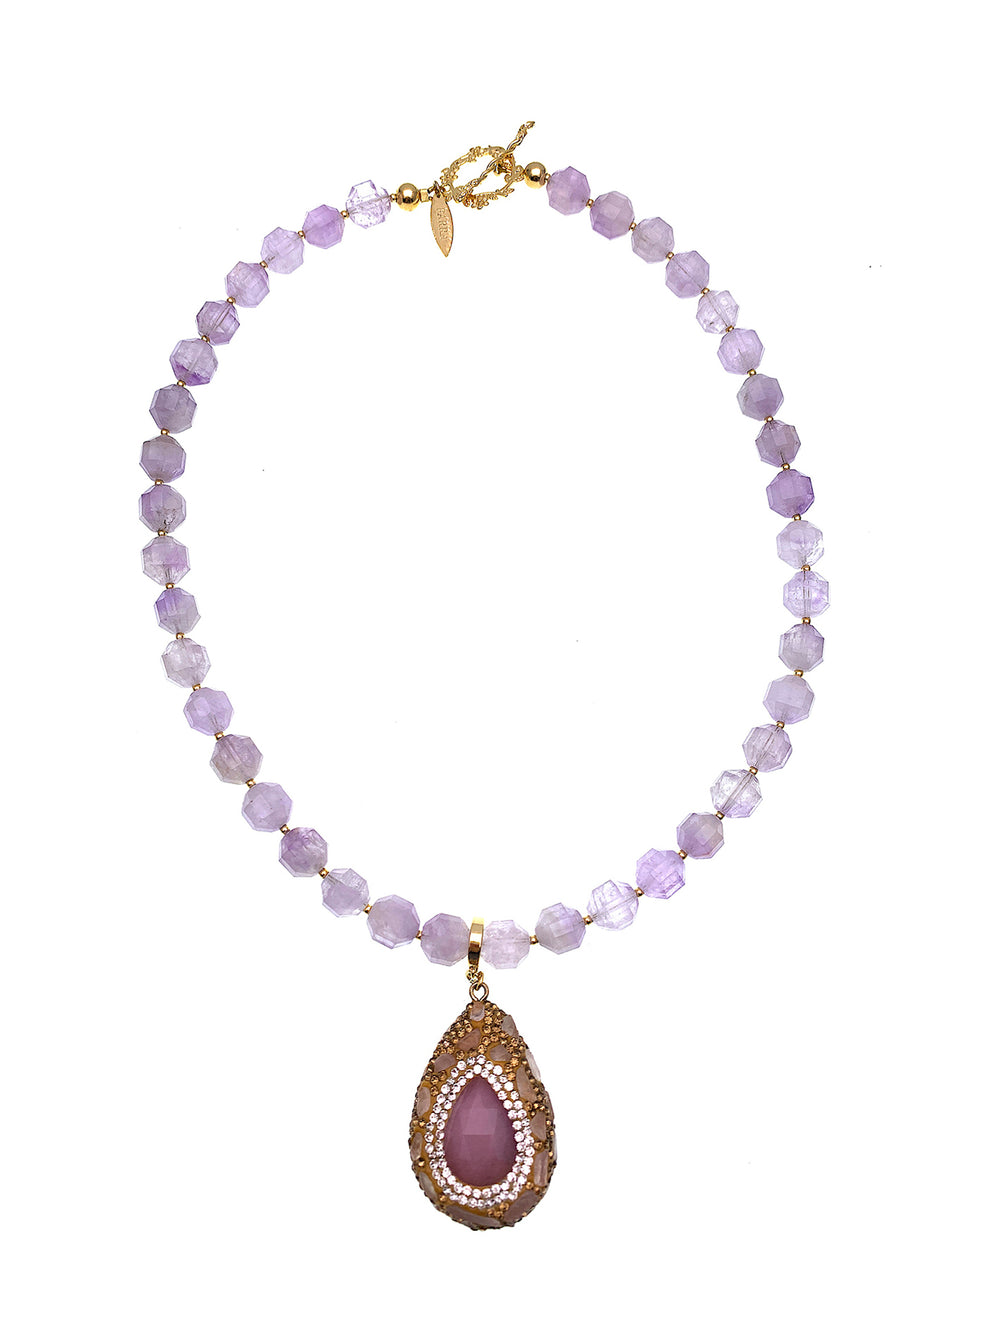 Amethyst With Removable Rhinestone Pendant Necklace FN014 - FARRA